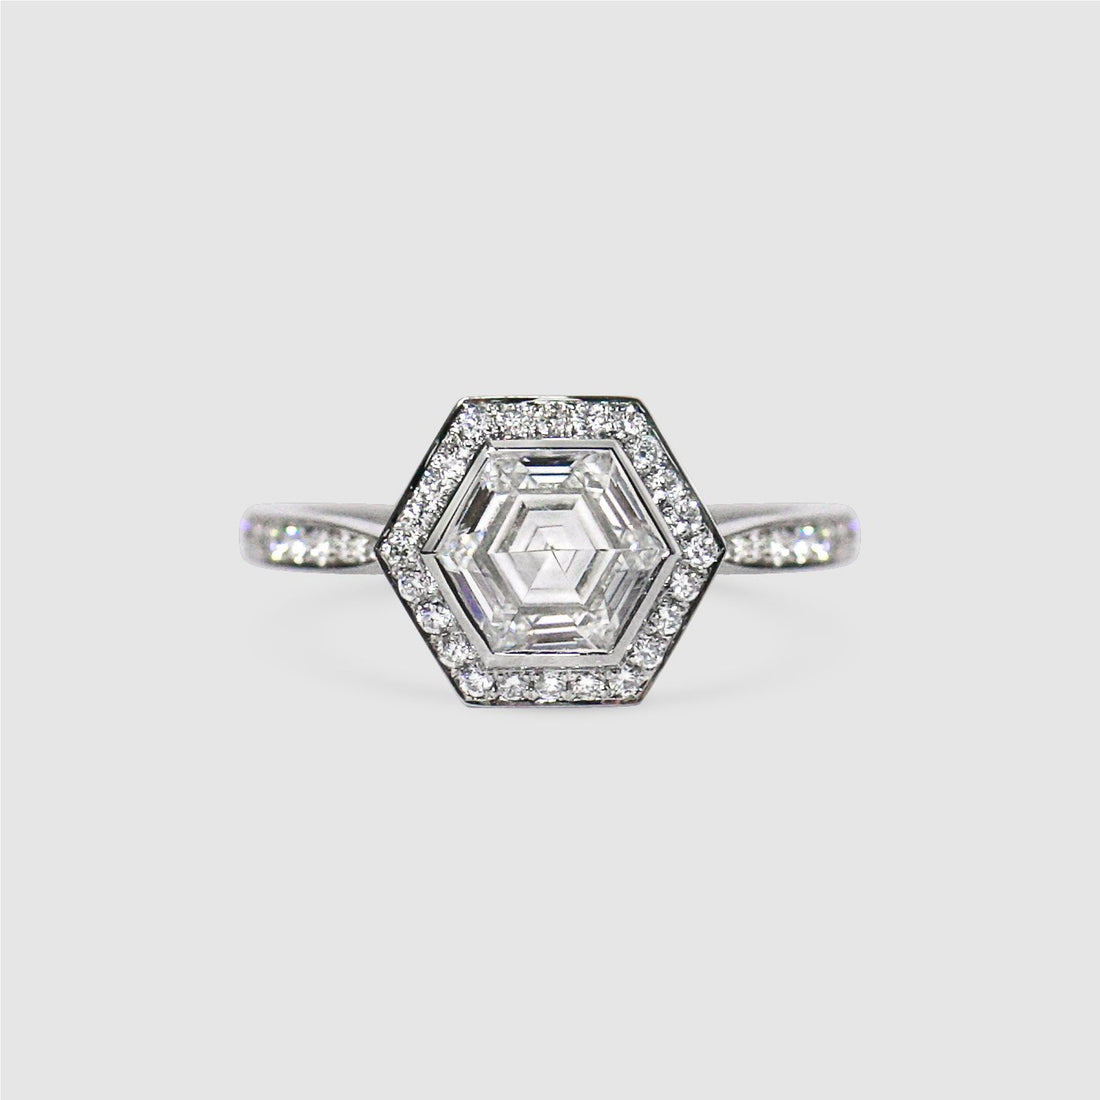  Hexagon Diamond Engagement Ring by Gee Woods | The Cut London